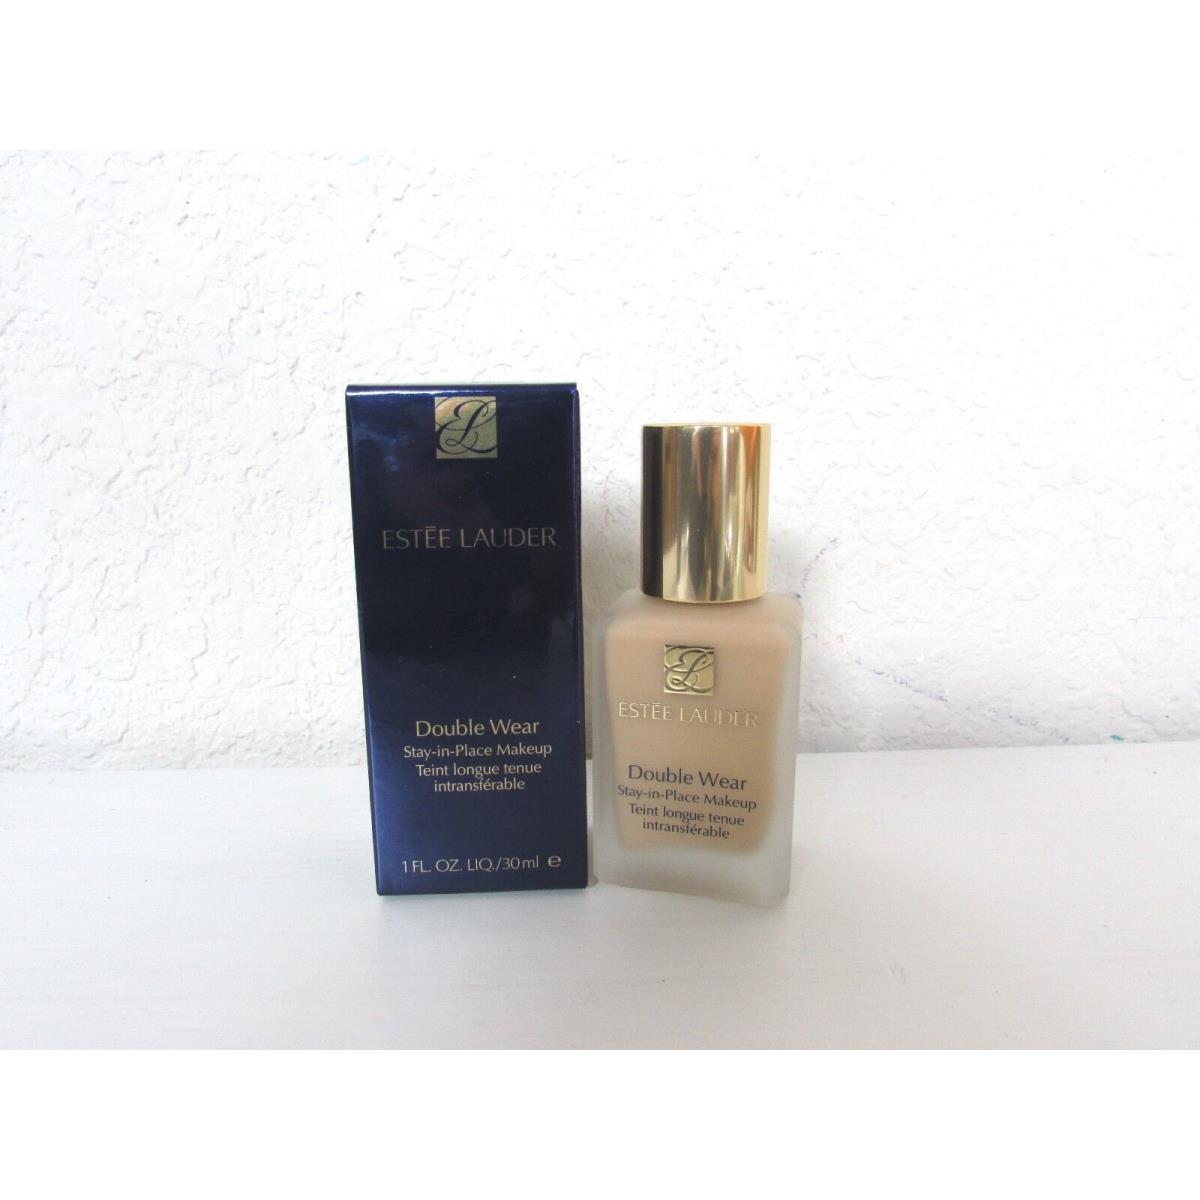 Estee Lauder Double Wear Stay-in-place Makeup Choose Your Shade 1.0 Oz/30 ml 3W1.5 Fawn (New)